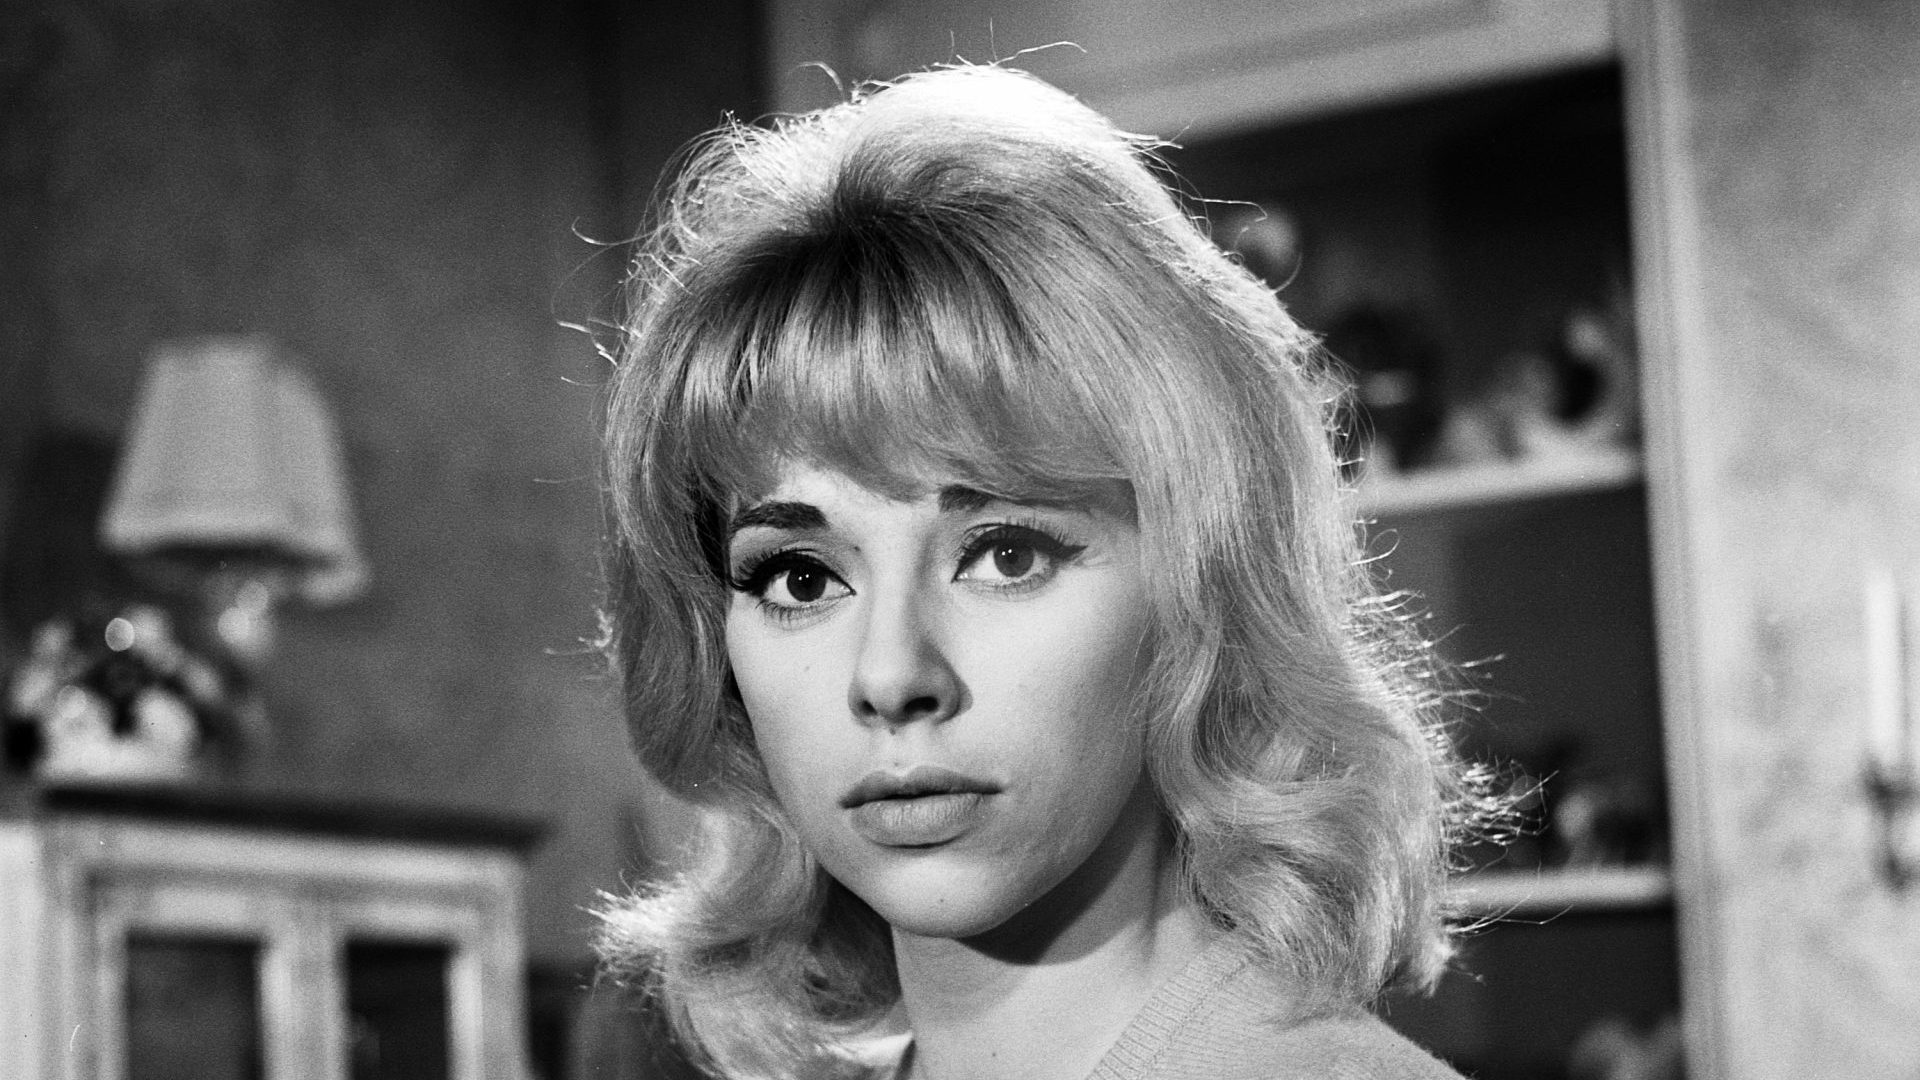 French model and actor Mireille Darc during the shooting of TV film L’été en hiver (The Summer in Winter) in 1963. Photo: Jean Adda/INA/Getty